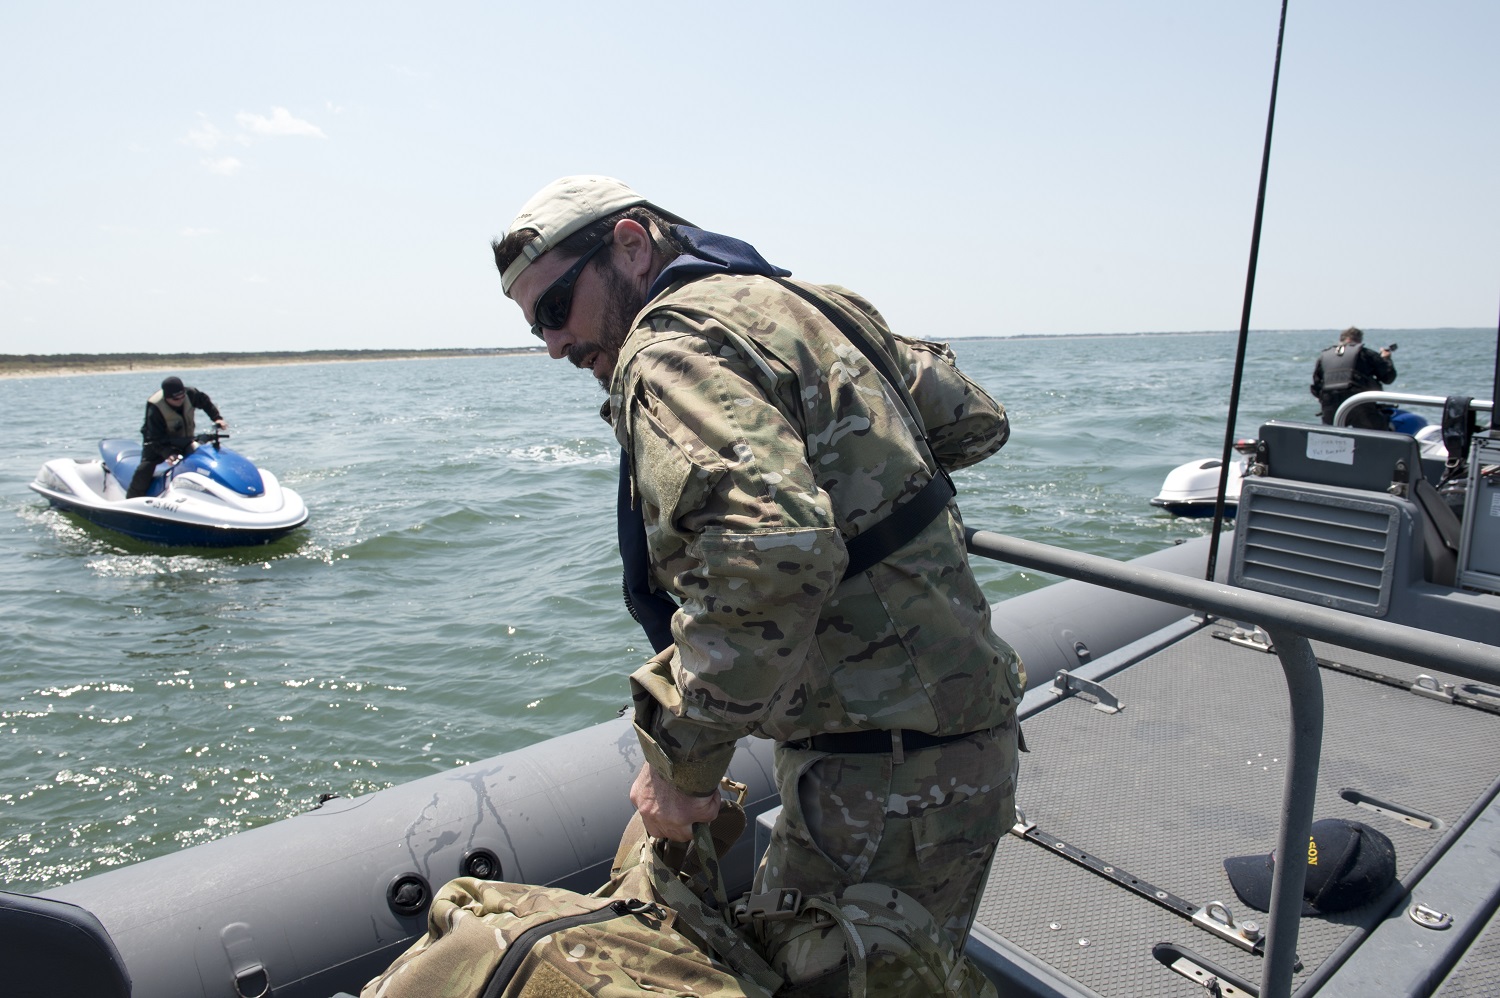 Operations Advisor Don Behr prepares to be transported from an 11-meter rigid-hull inflatable boat to a jet-ski operated by Seaward Services Boat Capt. Sam Calabese during a high-value target interdiction scenario on the beach off the coast of Virginia Beach, Va., April 22, 2015. Over two weeks in April, CNO’s Rapid Innovation Cell and Stiletto personnel along with system developers tracked Behr as a simulated target of interest from the Stiletto’s Command Information Center to assess adaptive force packages and new concepts for command and control and multi-sensor fusion technologies for smaller vessels. U.S. Navy photo by Nicholas Malay.